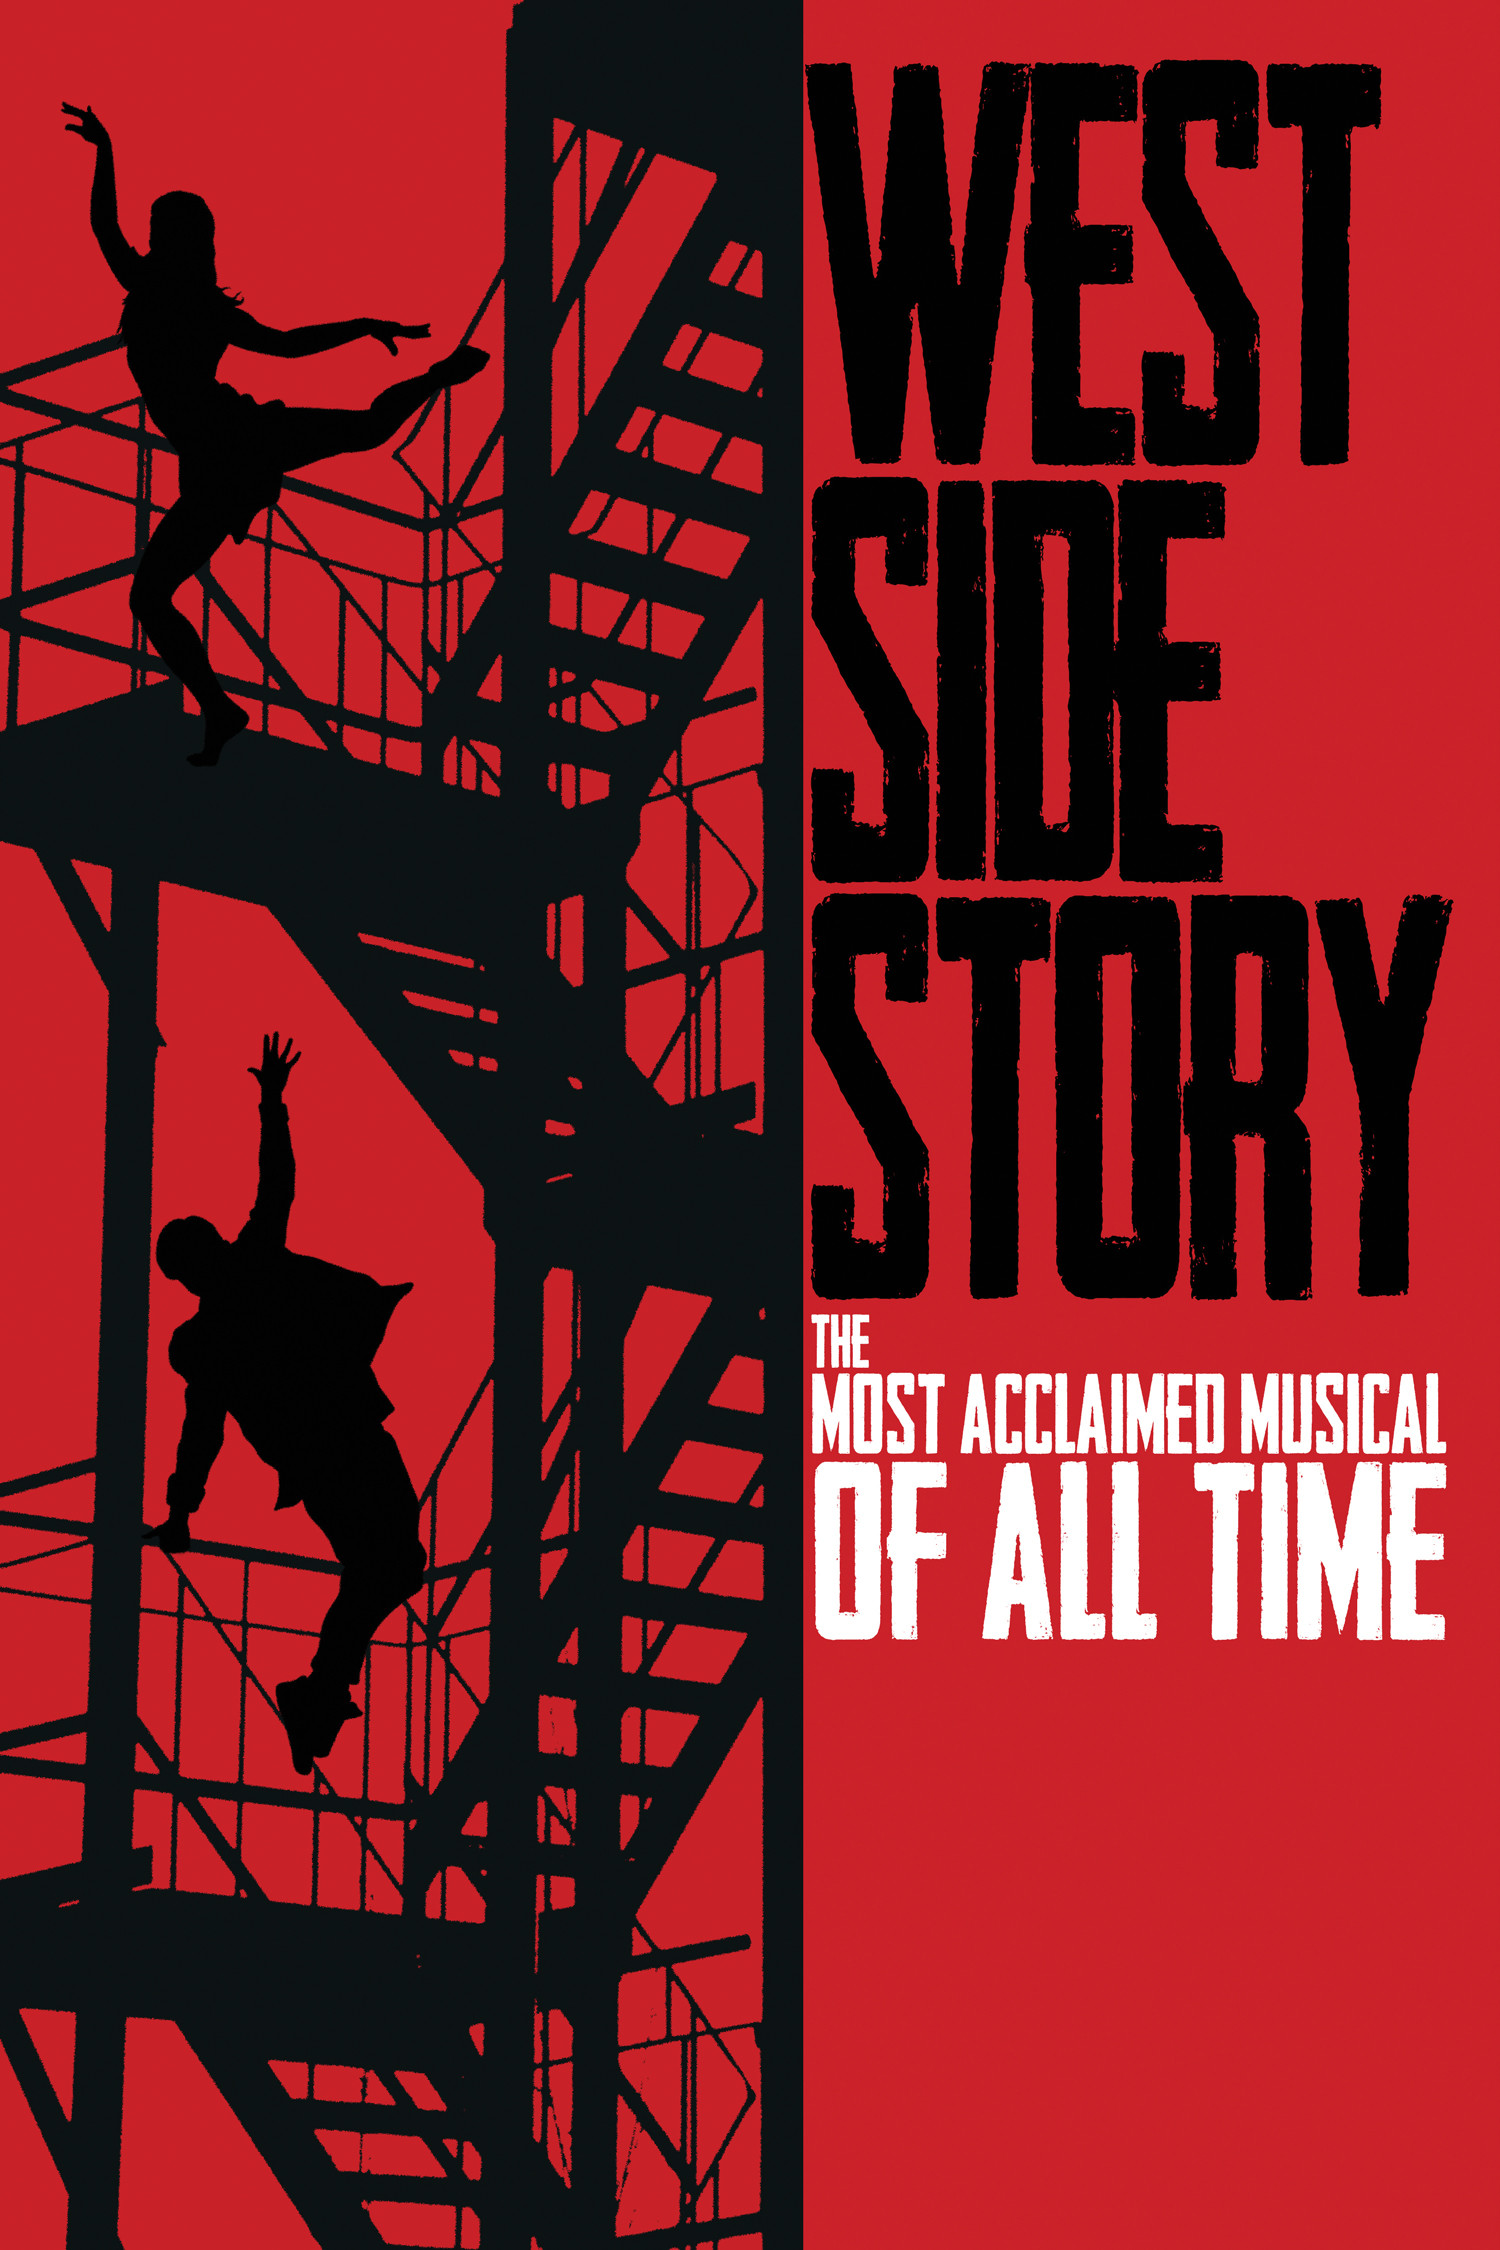 Amazing West Side Story Pictures Backgrounds Data   West Side